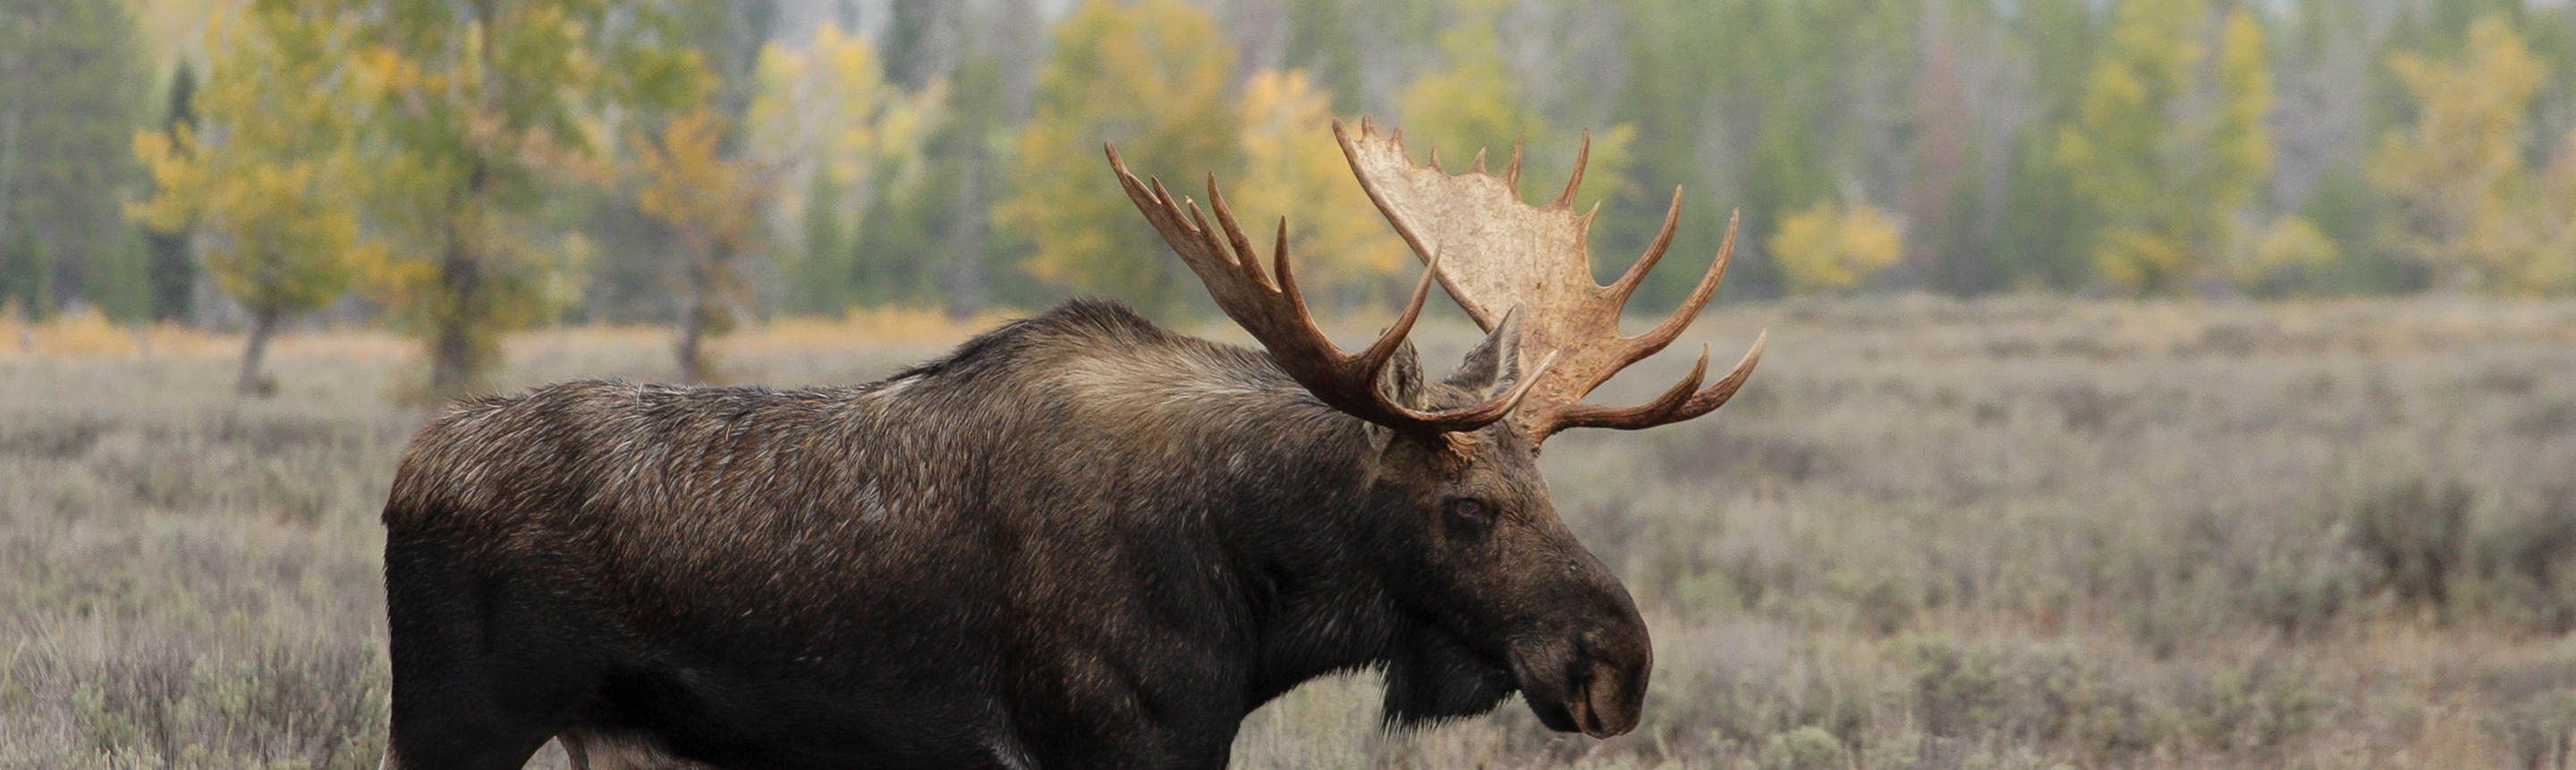 Moose Facts | Yellowstone Wildlife Guide